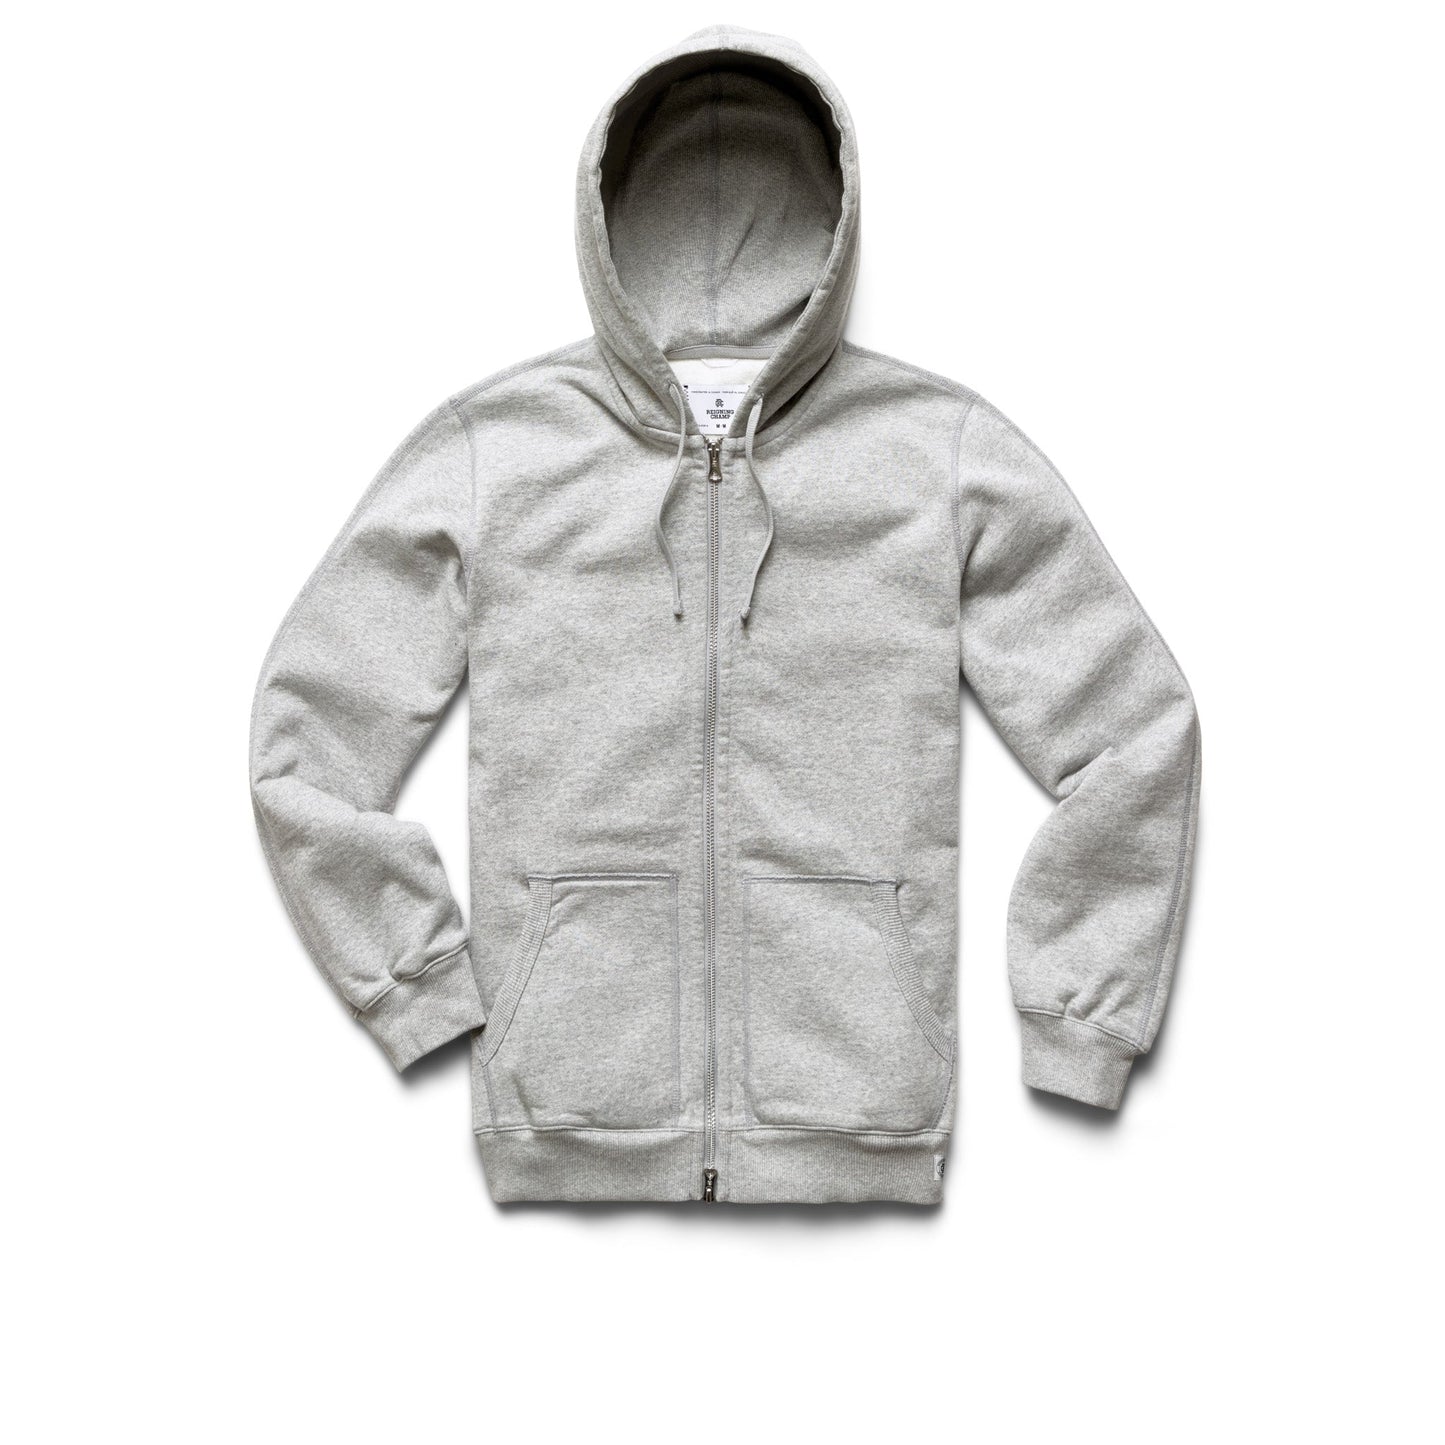 Heavyweight Sherpa Lined Full Zip Hoodie For Men and Women